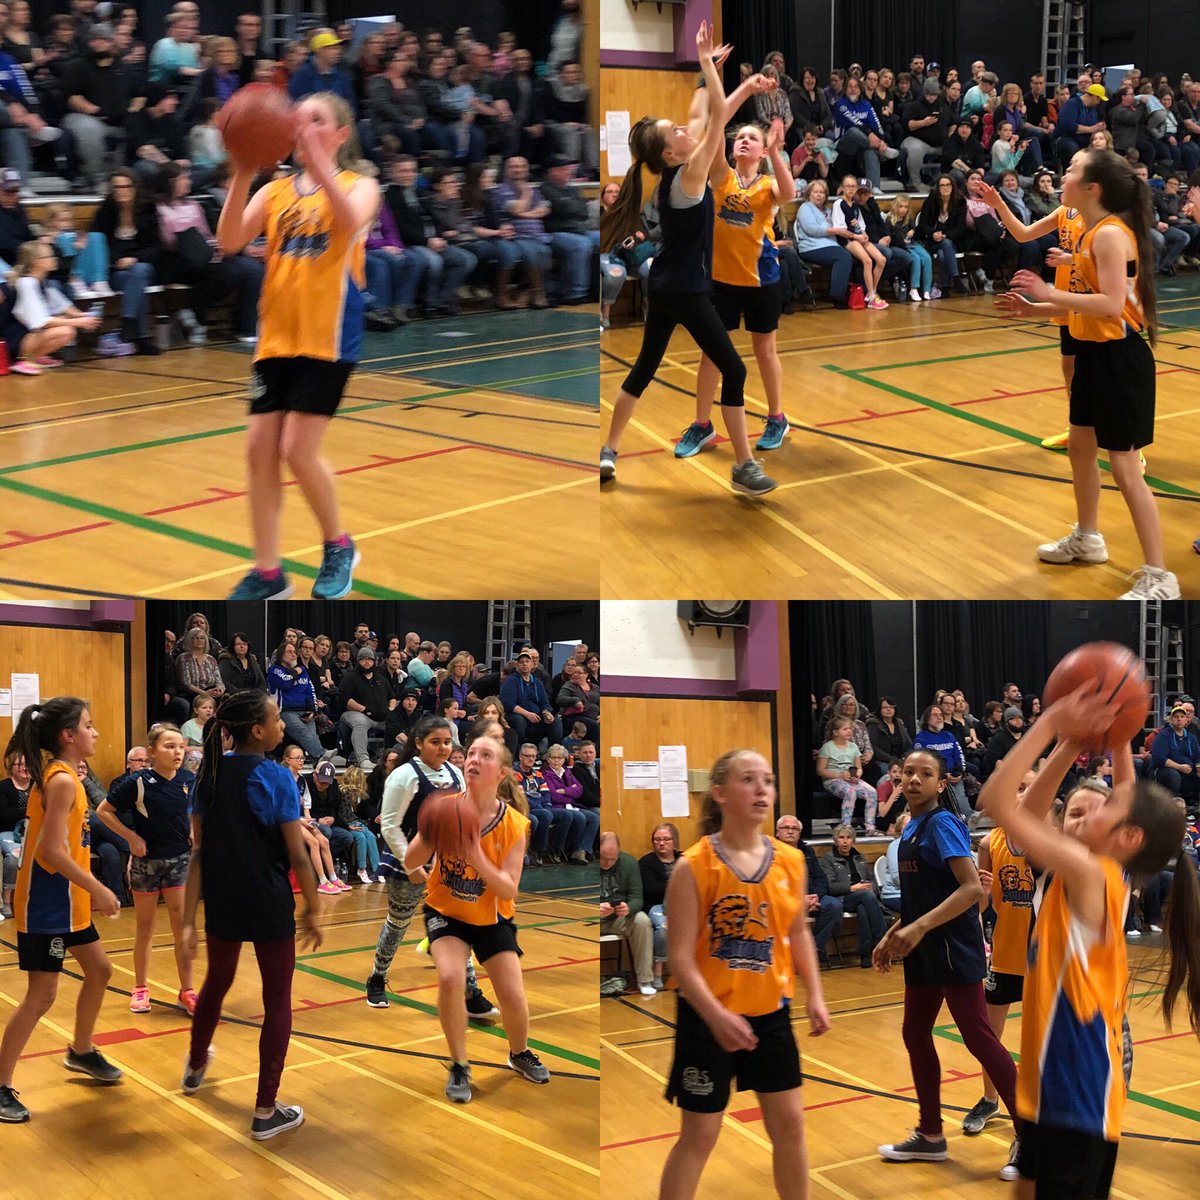 Girls basketball action. Thanks @RHJRavens for hosting the Ted Tchir tournament. #eips #3on3basketball